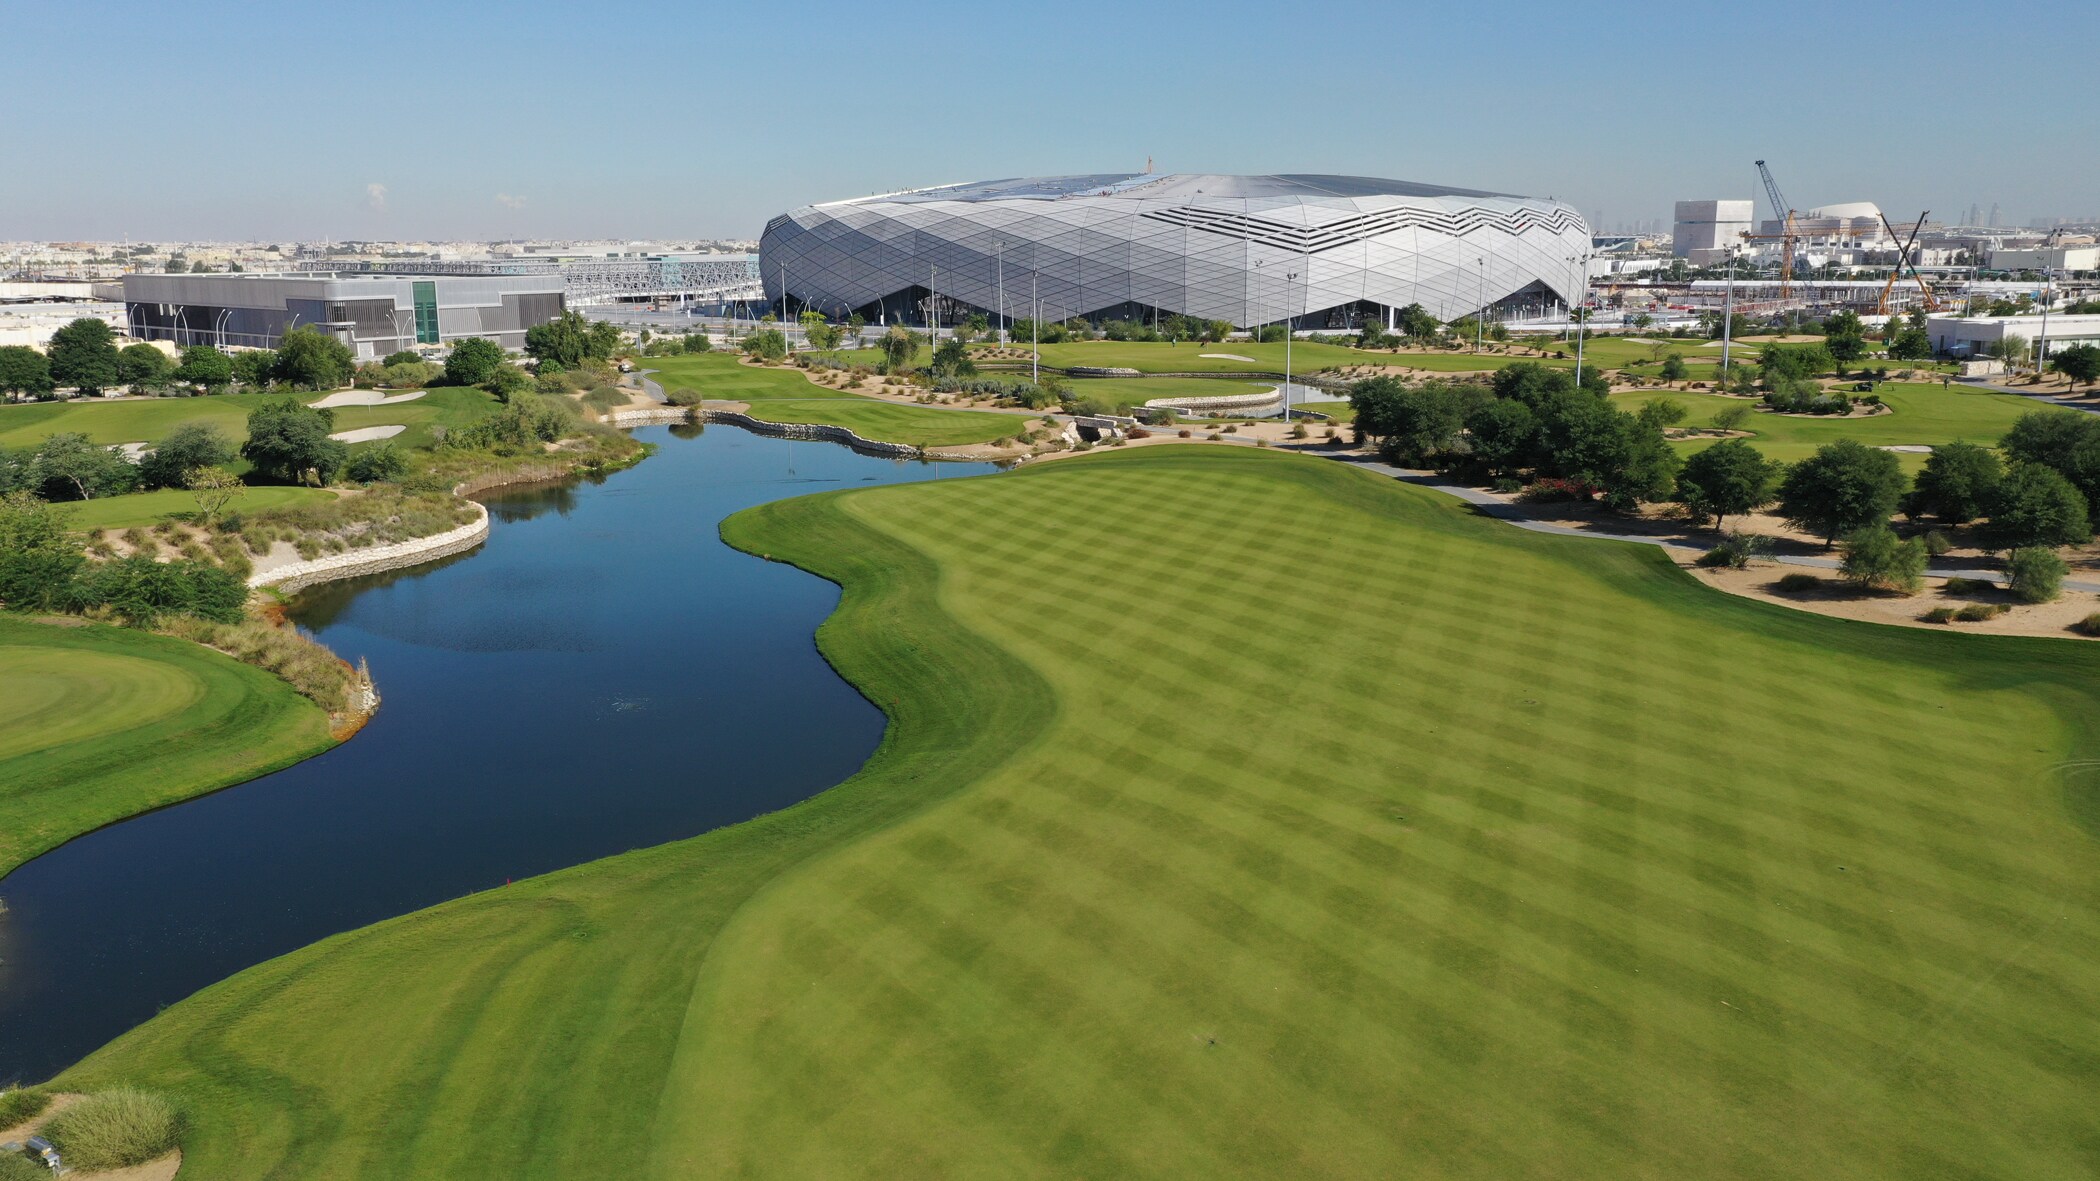 A view over the Education City golf course, with the 2022 FIFA World Cup Education City Stadium in the background.